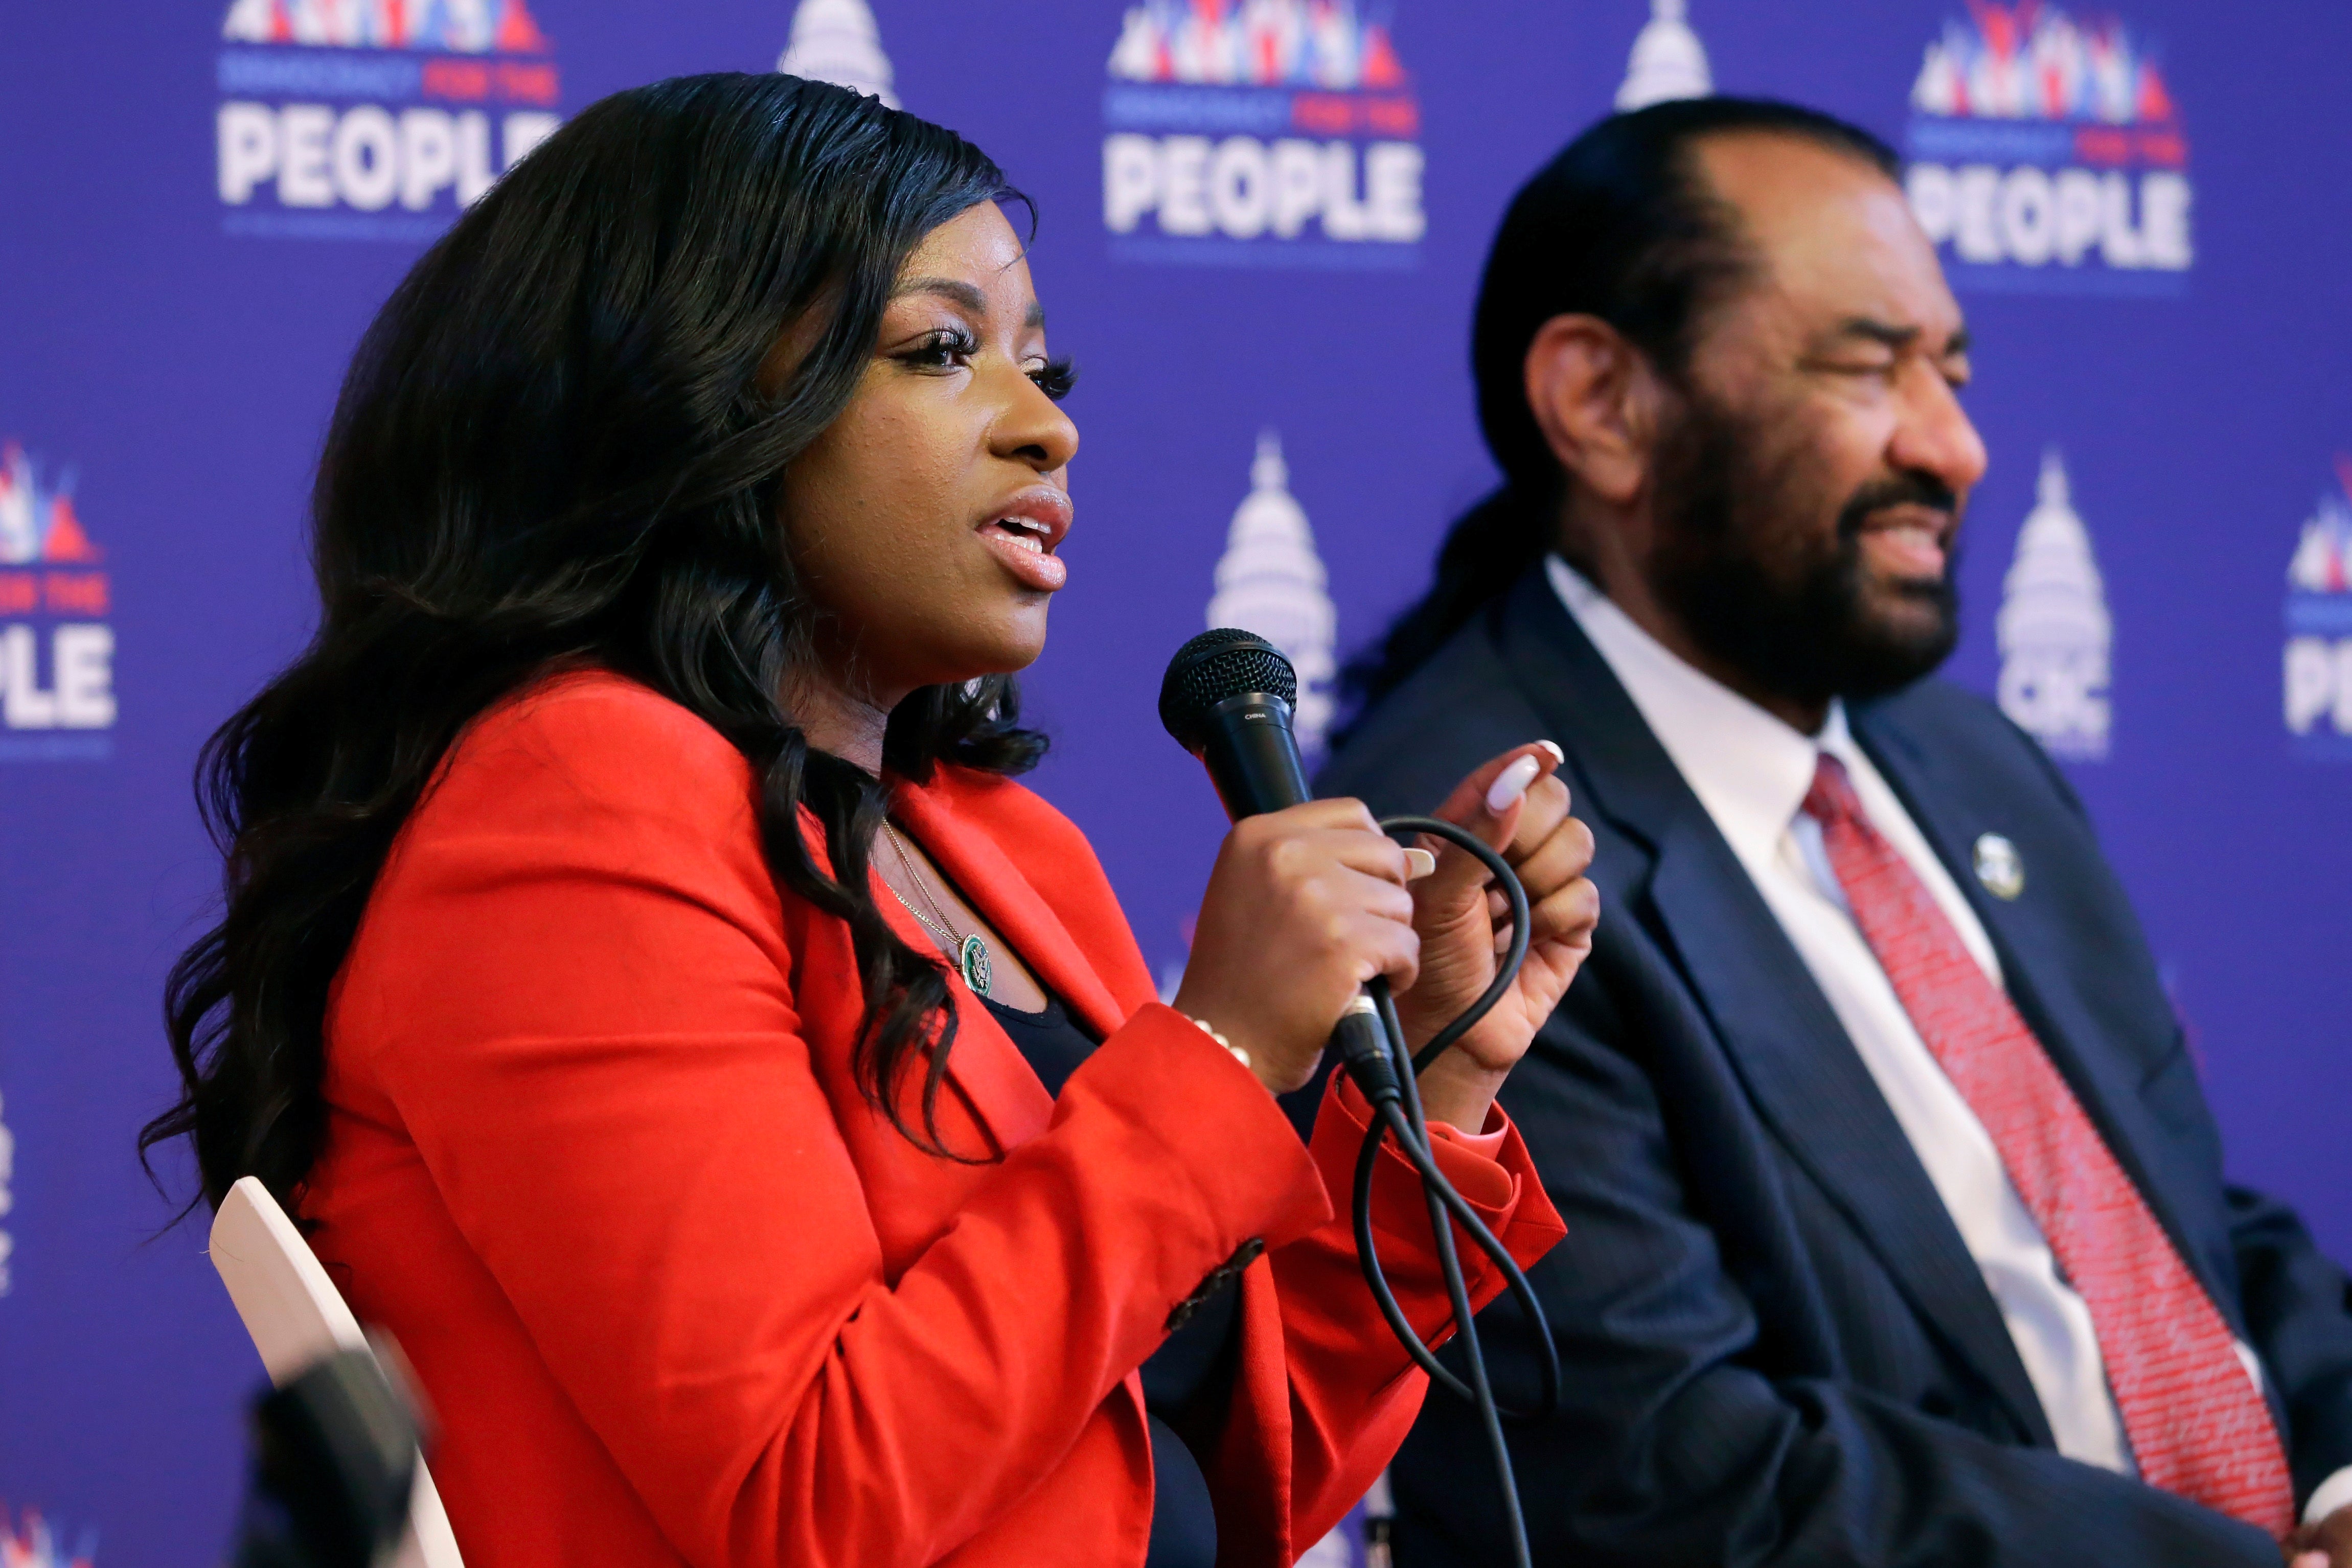 Rep Jasmine Crockett, D-Texas, left, speaks as Rep. Al Green, D-Texas, listens during a stop of the "Democracy for the People" tour, a race and democracy summit sponsored by the Congressional Black Caucus, Wednesday, July 28, 2023, in Houston.